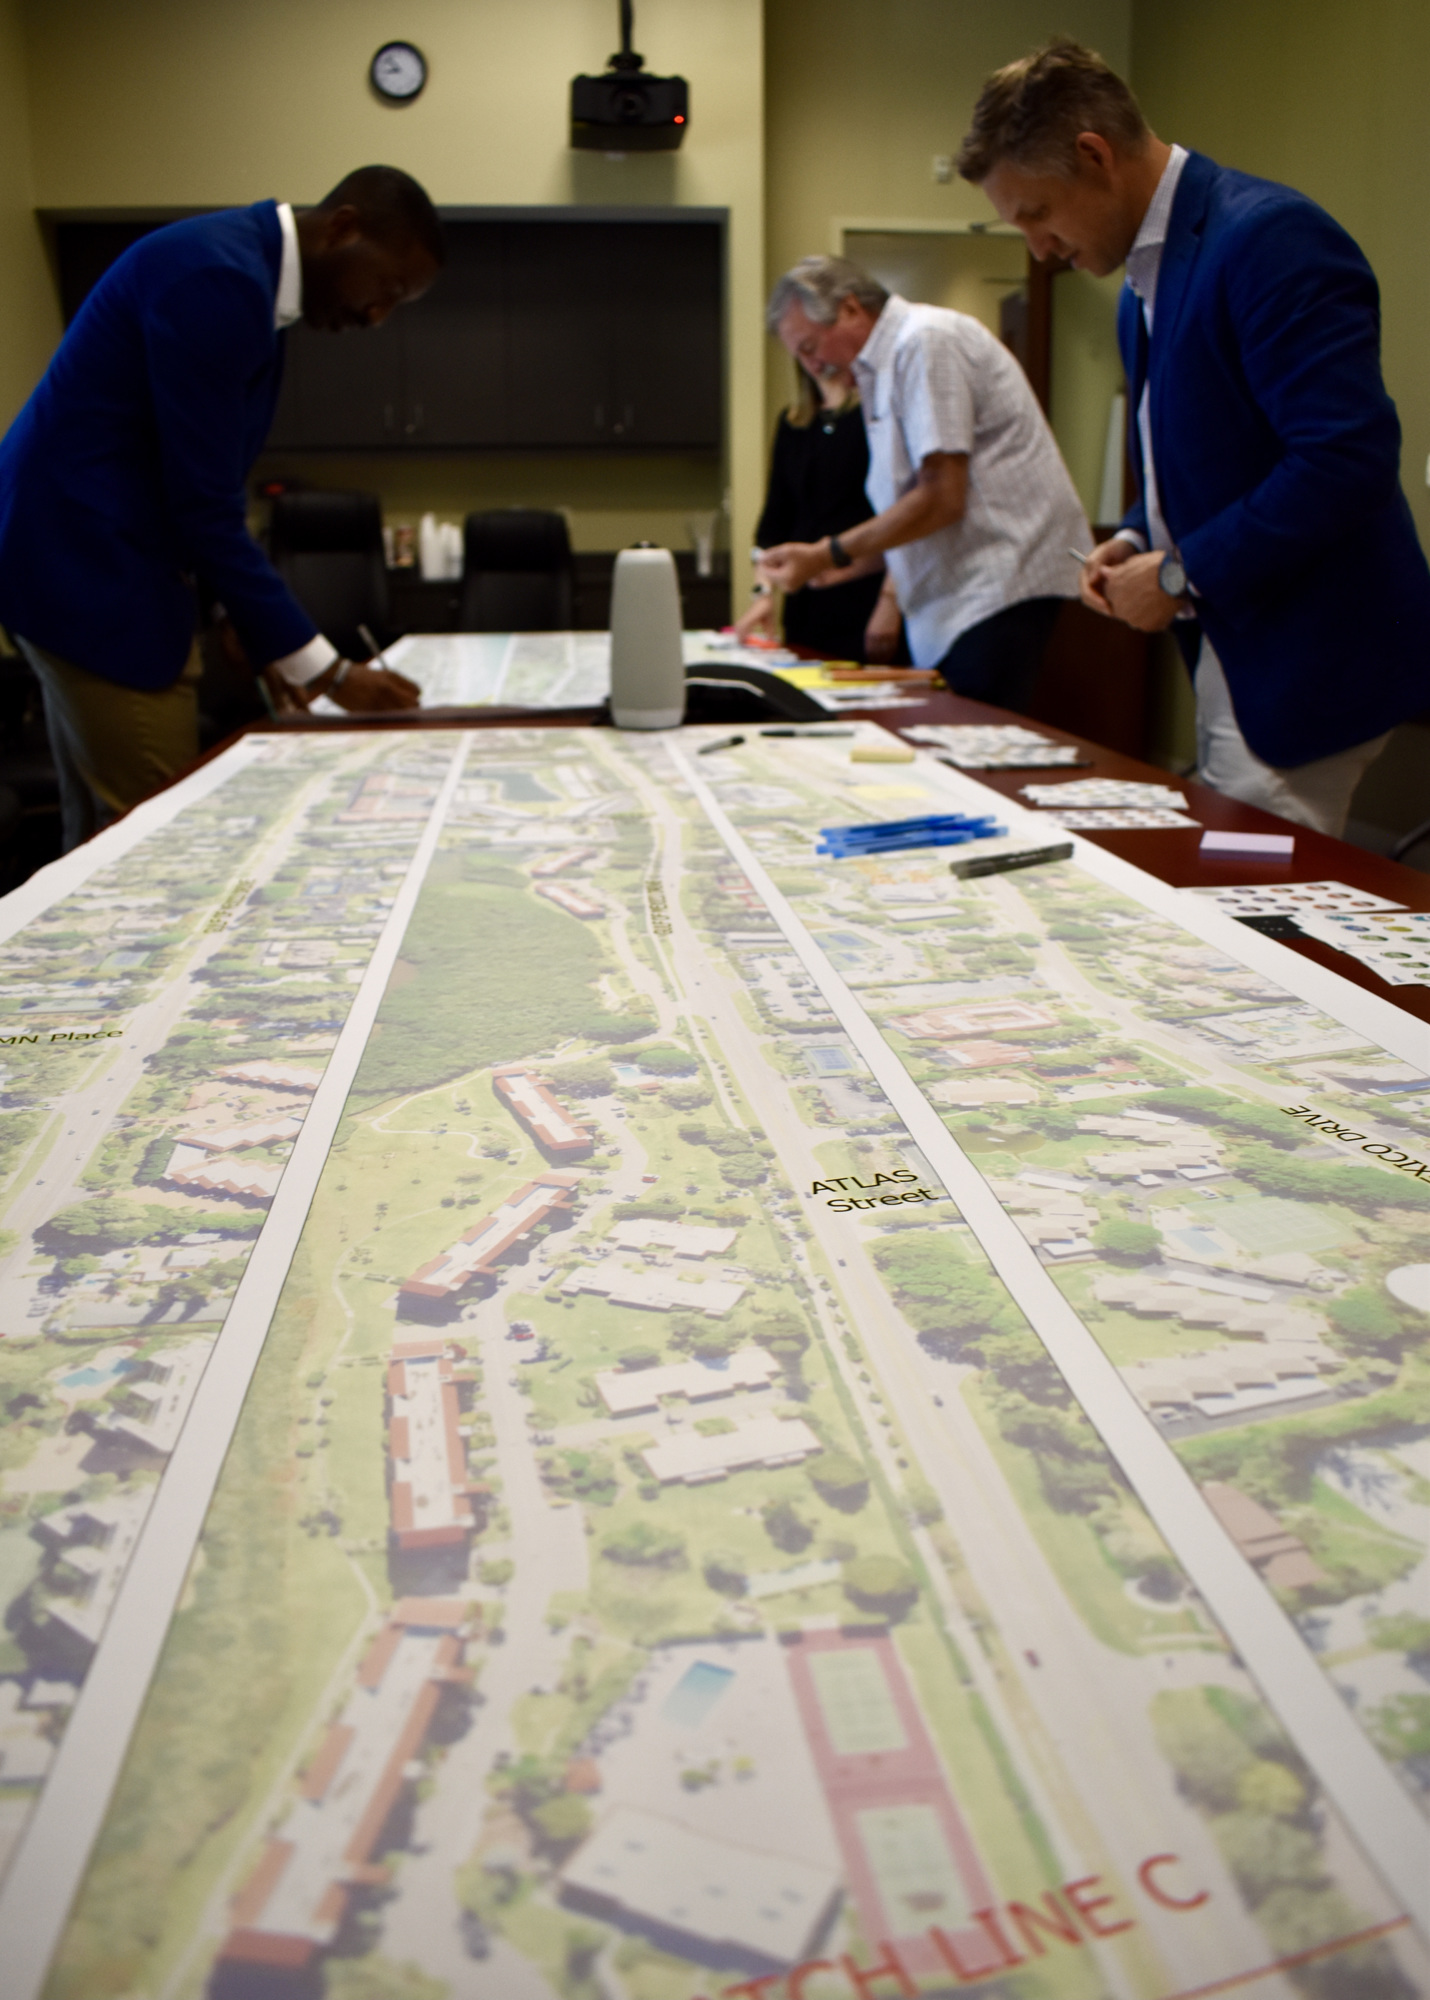 A large-scale map was arrayed across a conference table and another table.